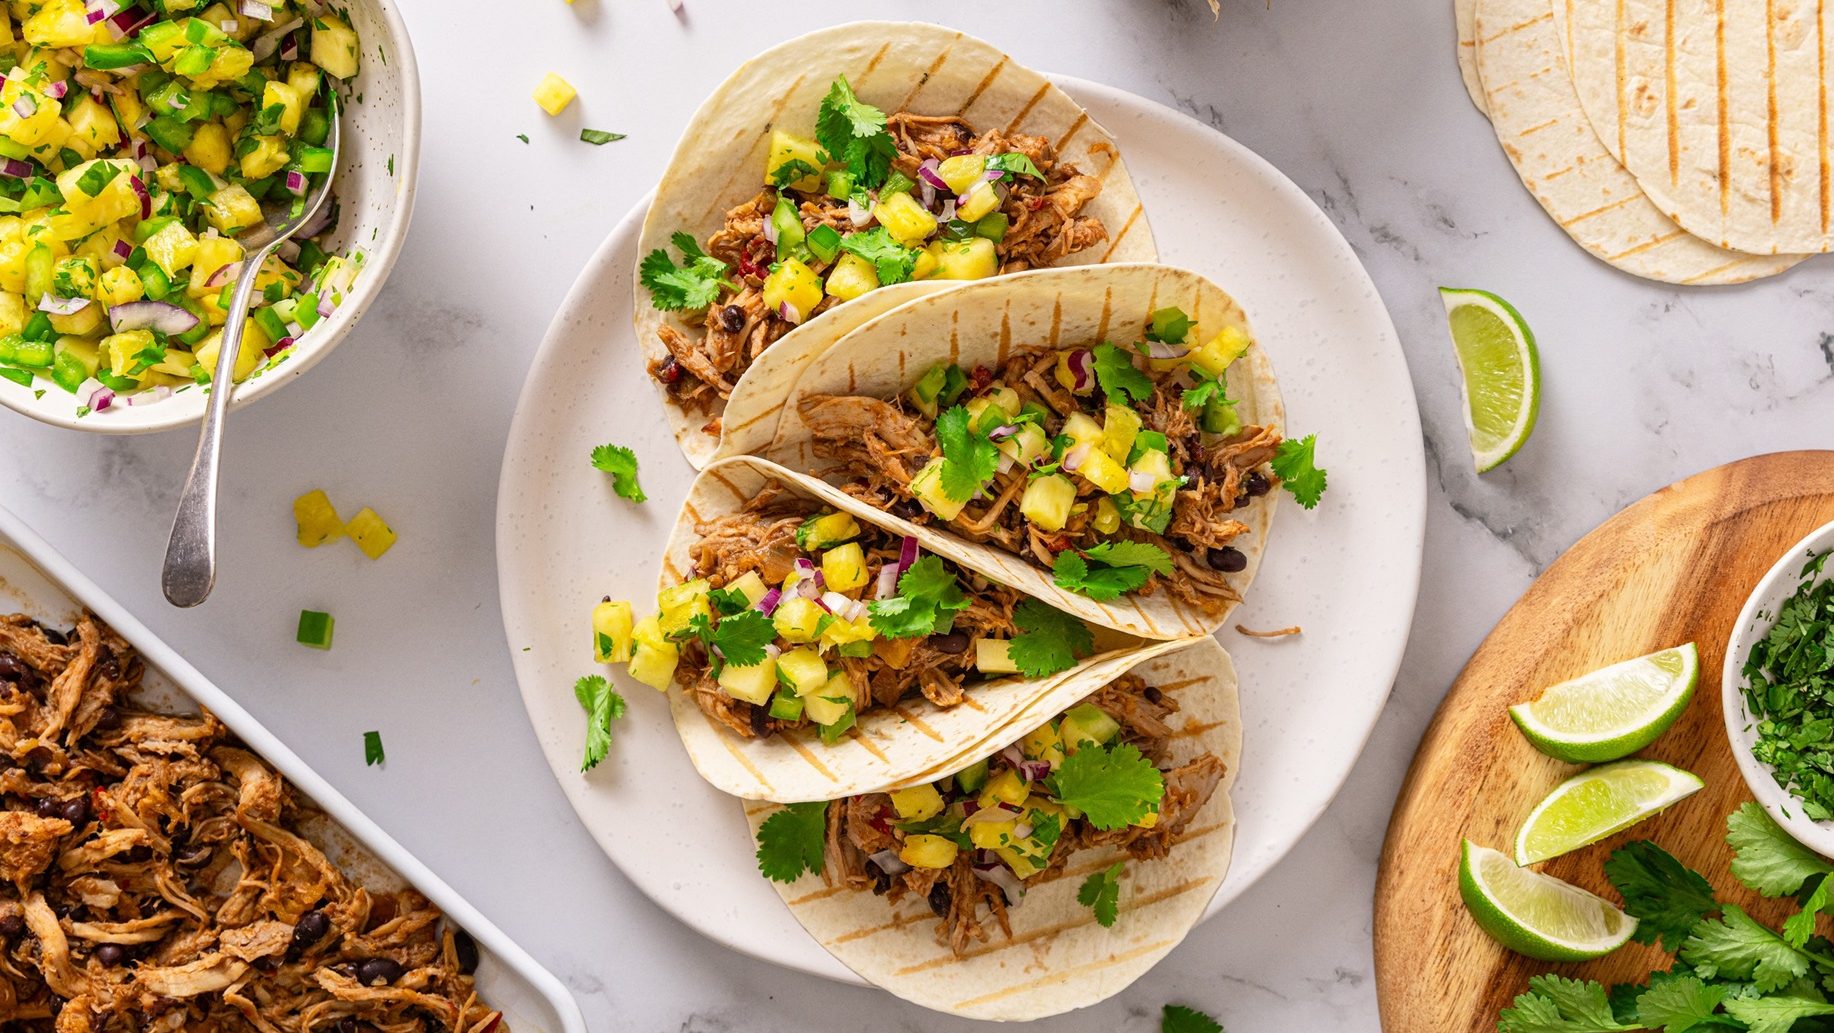 Four tacos filled with brown, yellow and green food on white plate. Surrounded by ingredients.